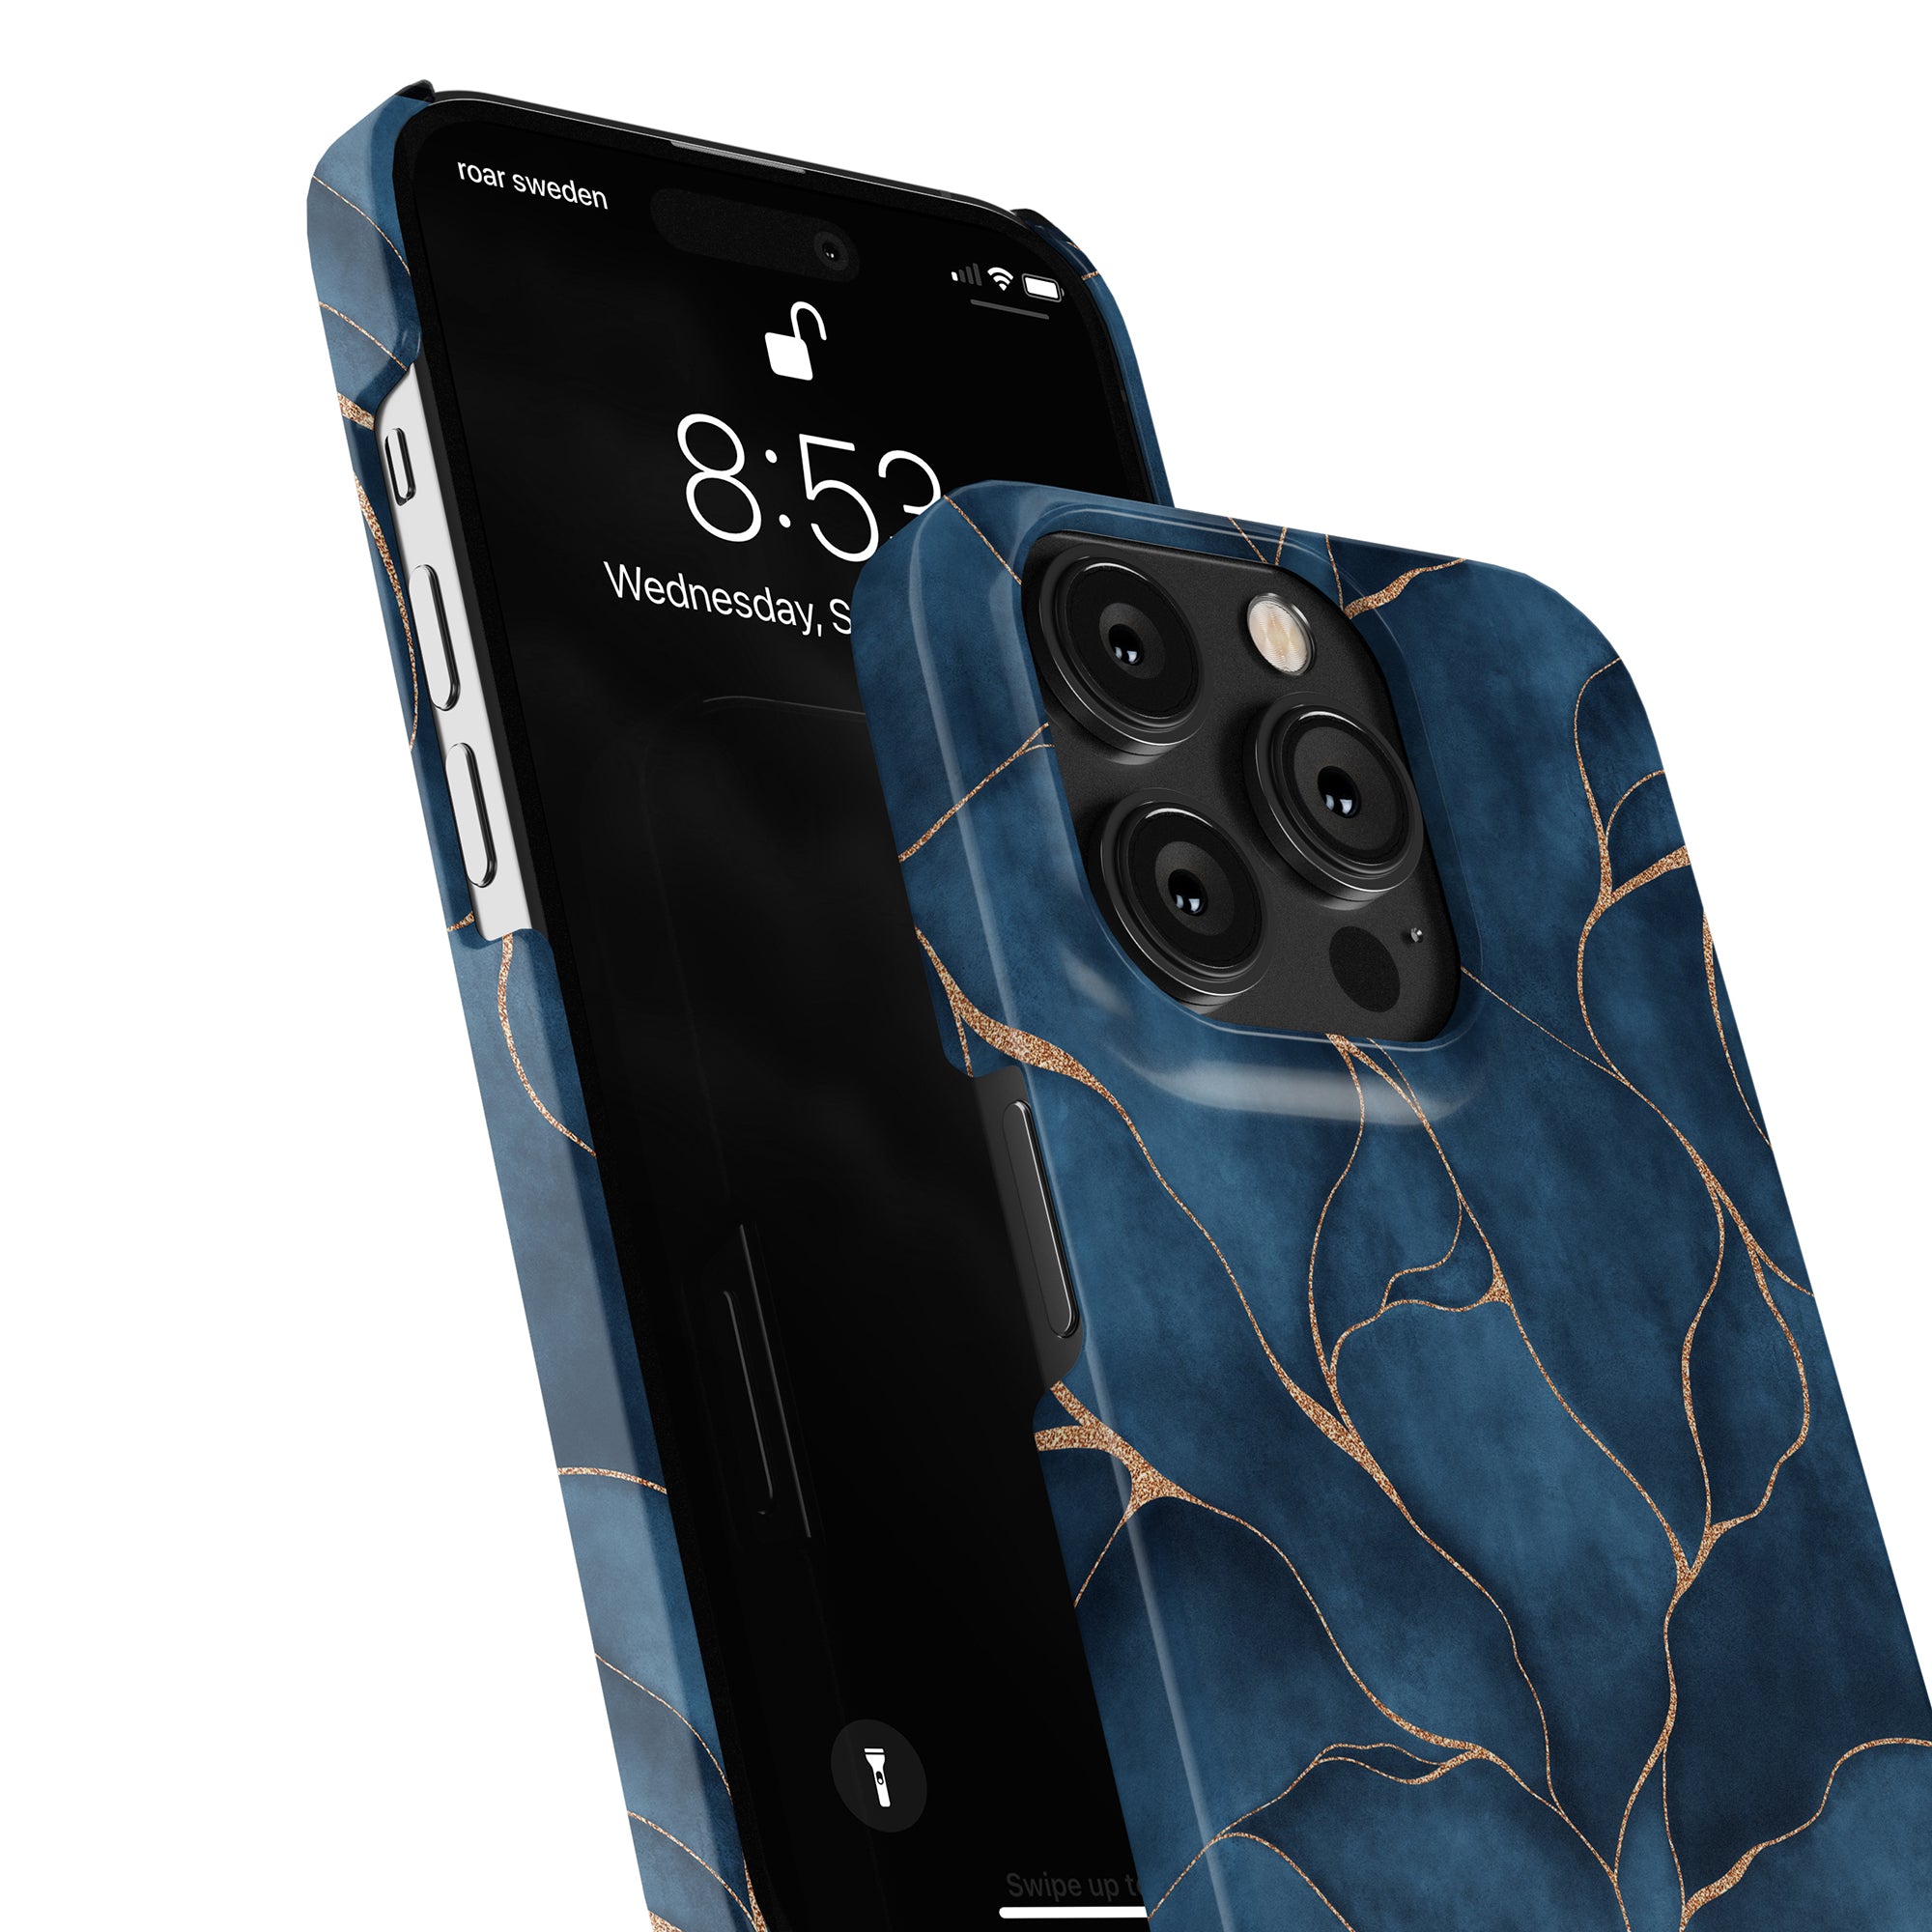 A Yggdrasil slim case for the iPhone 11 Pro smartphone.